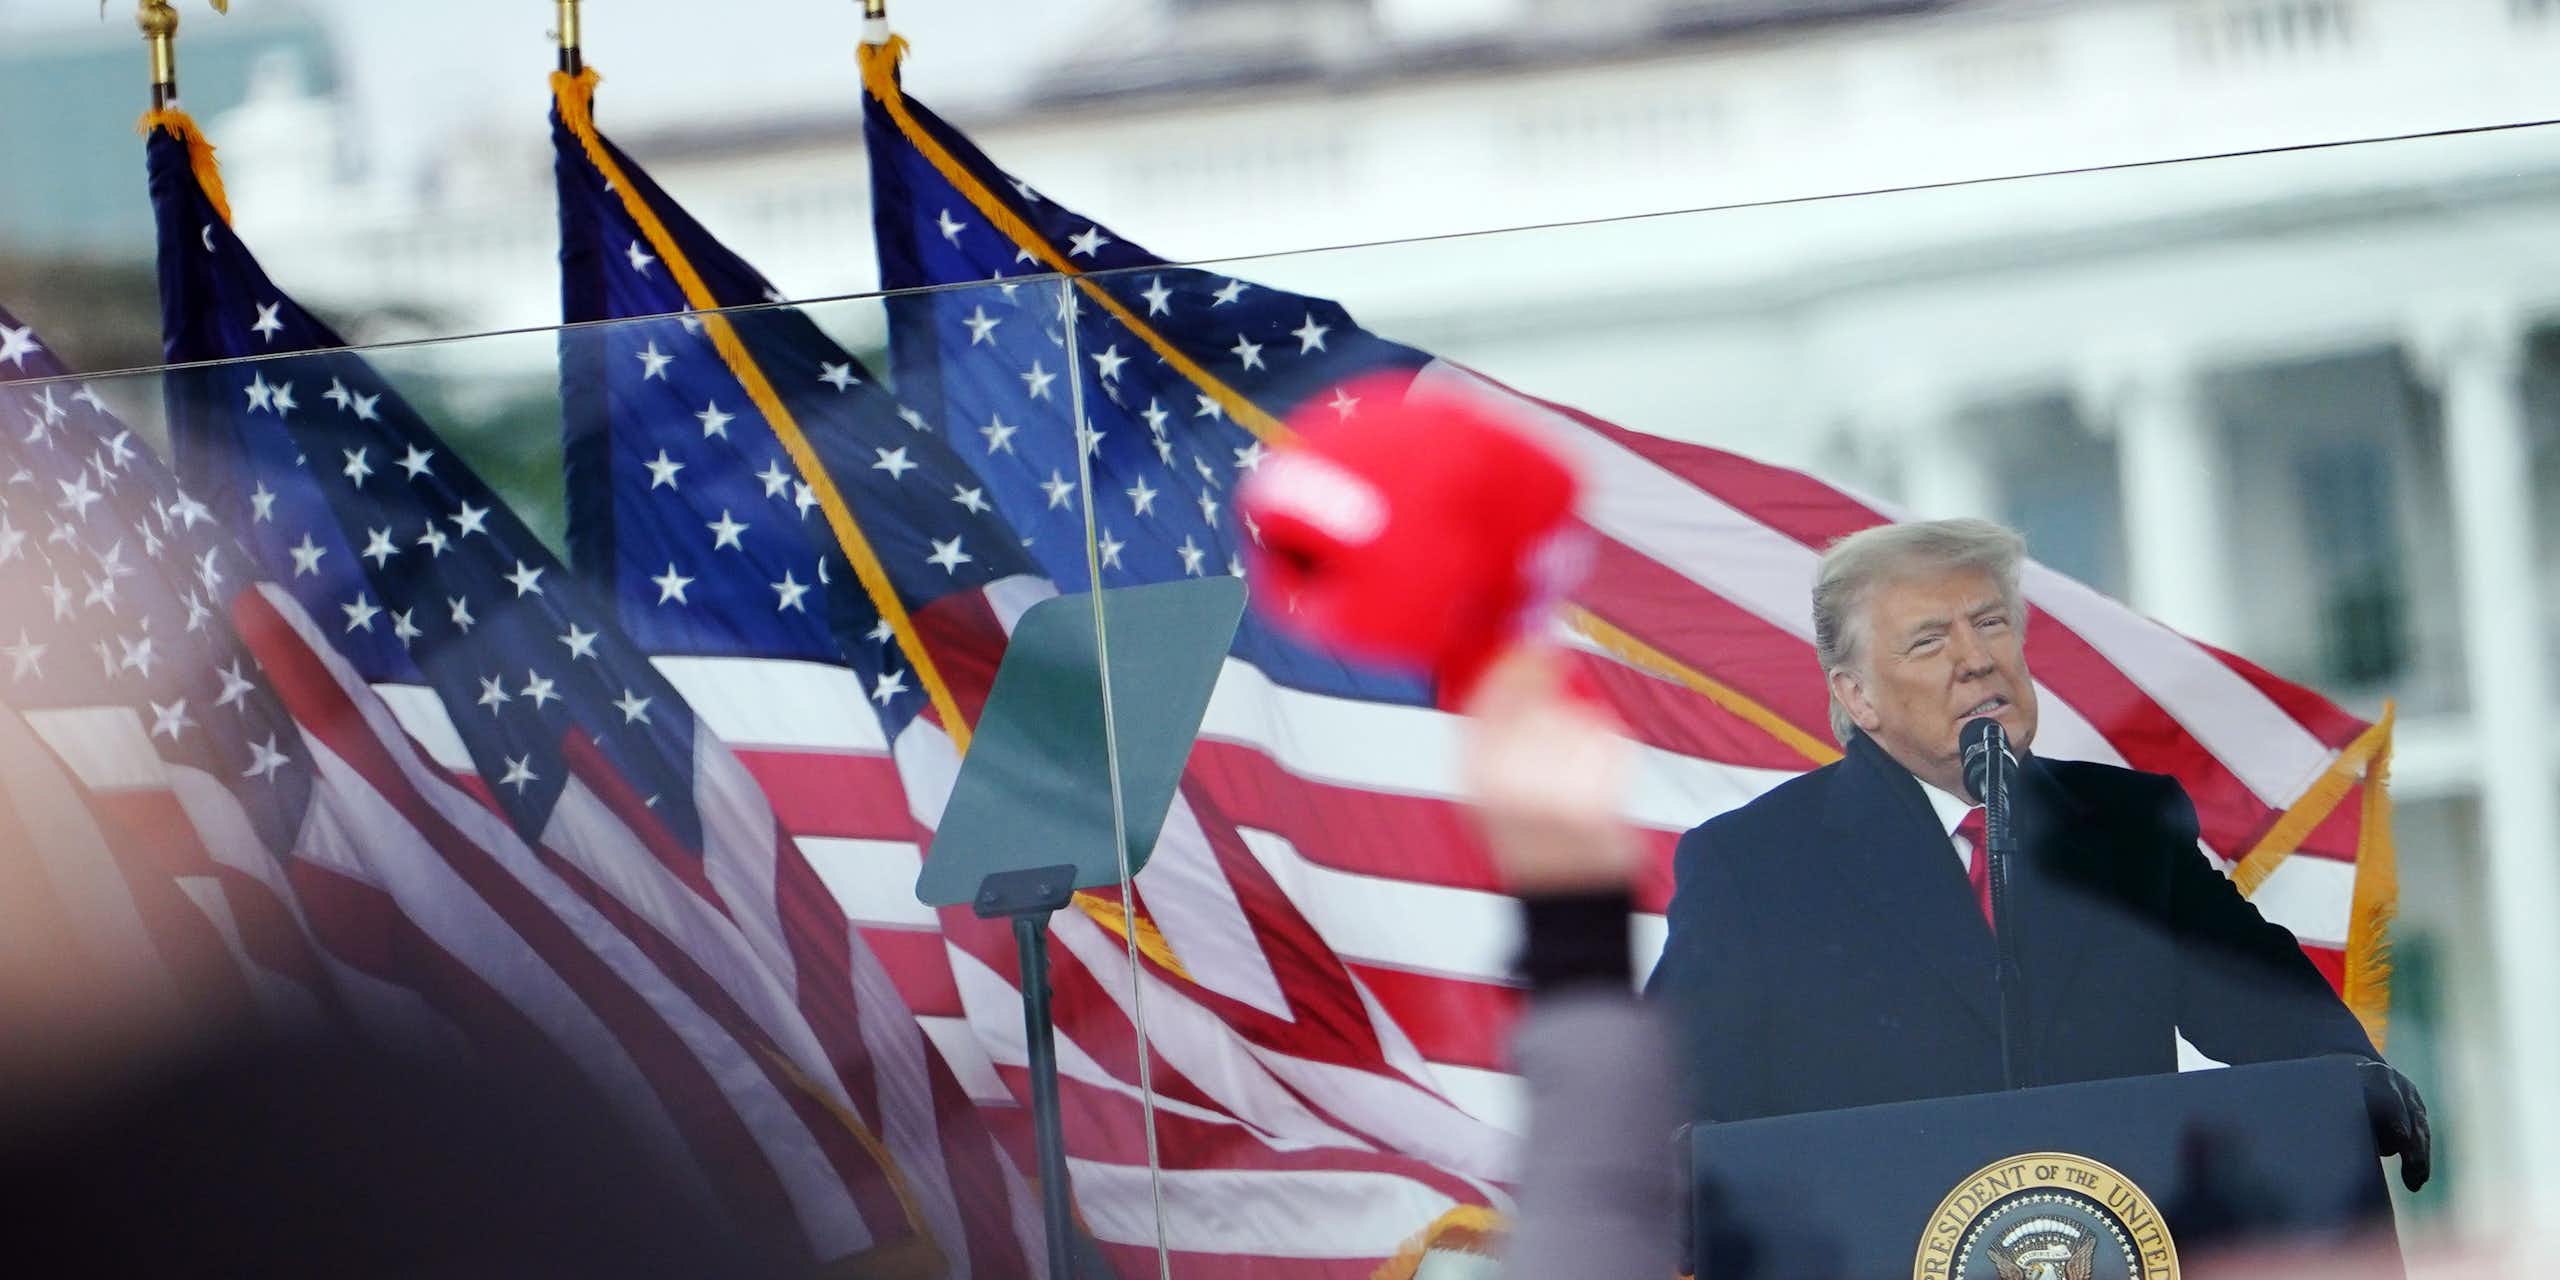 A man speaks in front of a row of American flags.